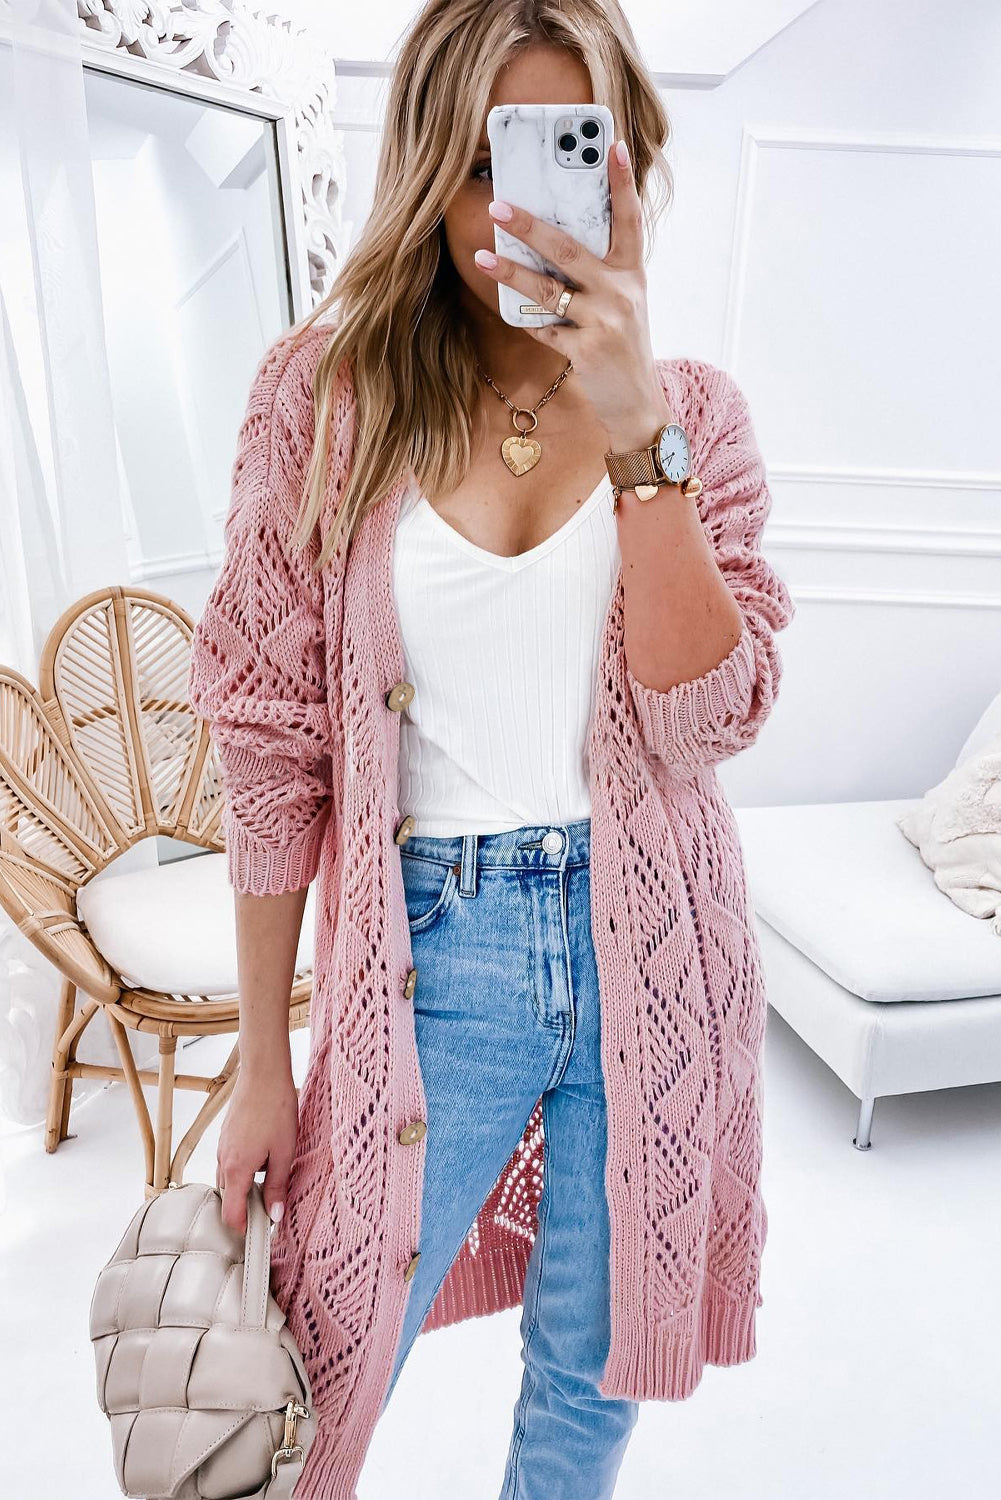 V-Neck Long Sleeve Cardigan - Women’s Clothing & Accessories - Shirts & Tops - 8 - 2024